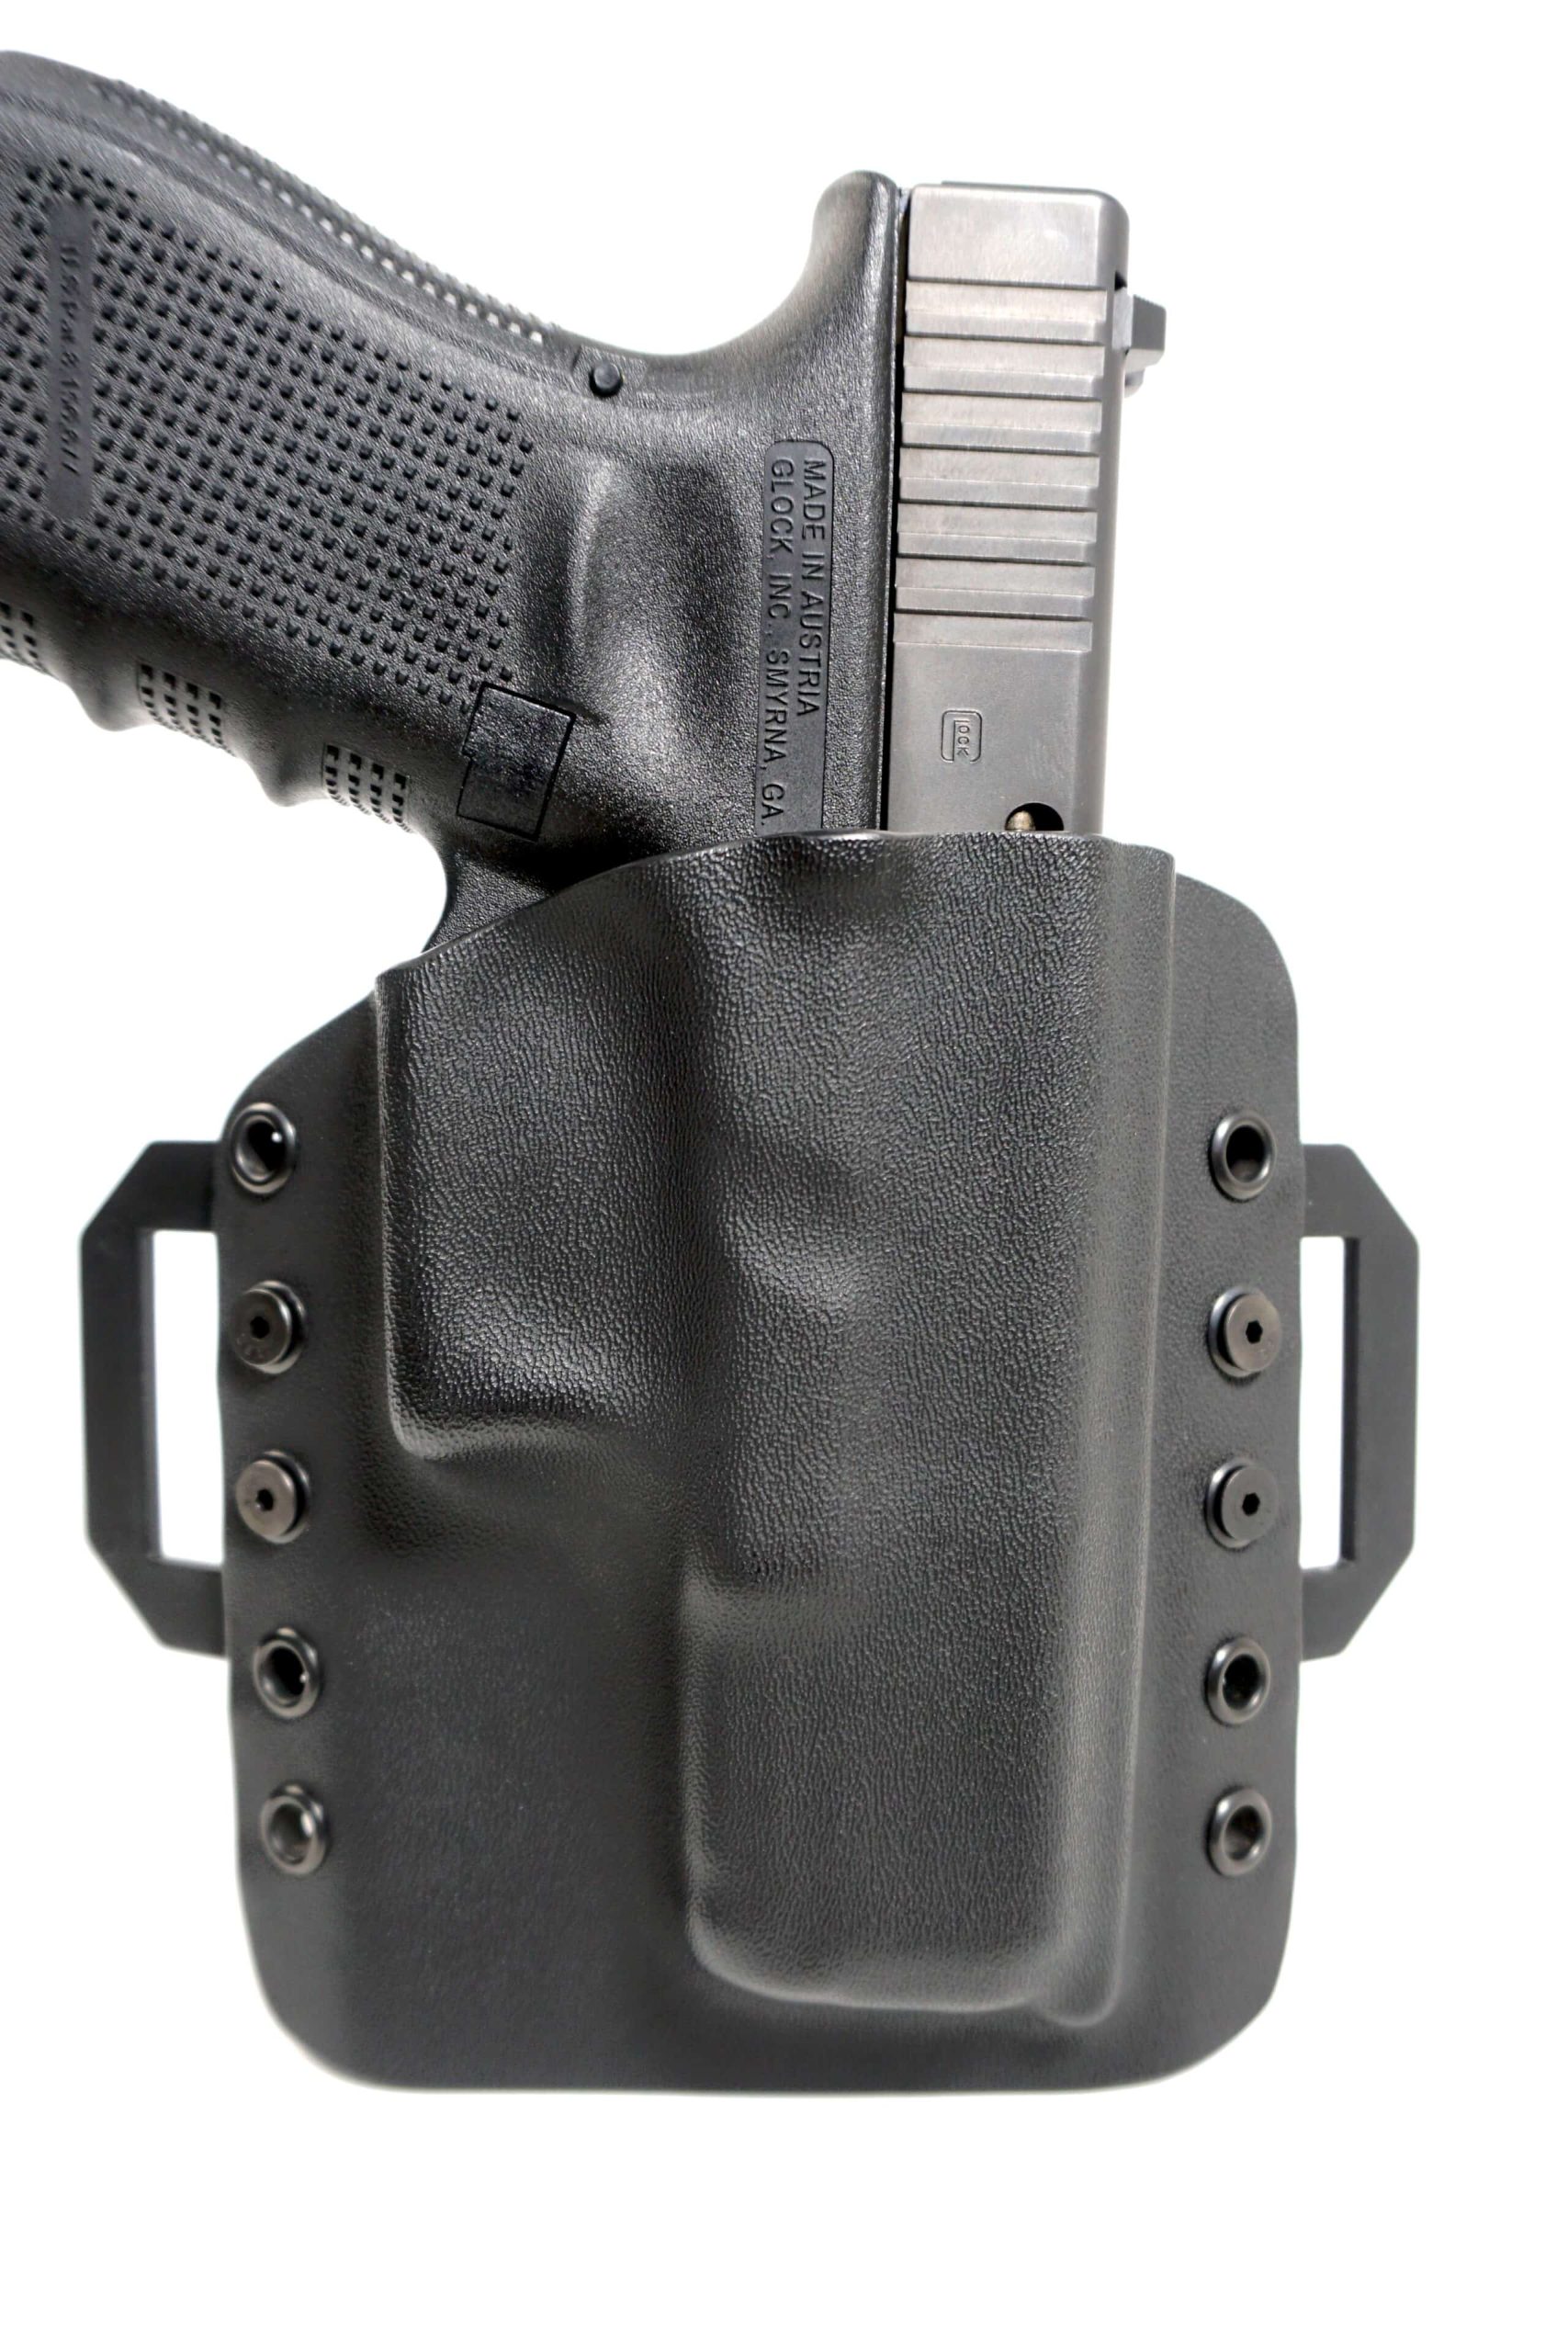 Taurus G2S OWB Kydex Holster - Made in U.S.A. - Lifetime Warranty